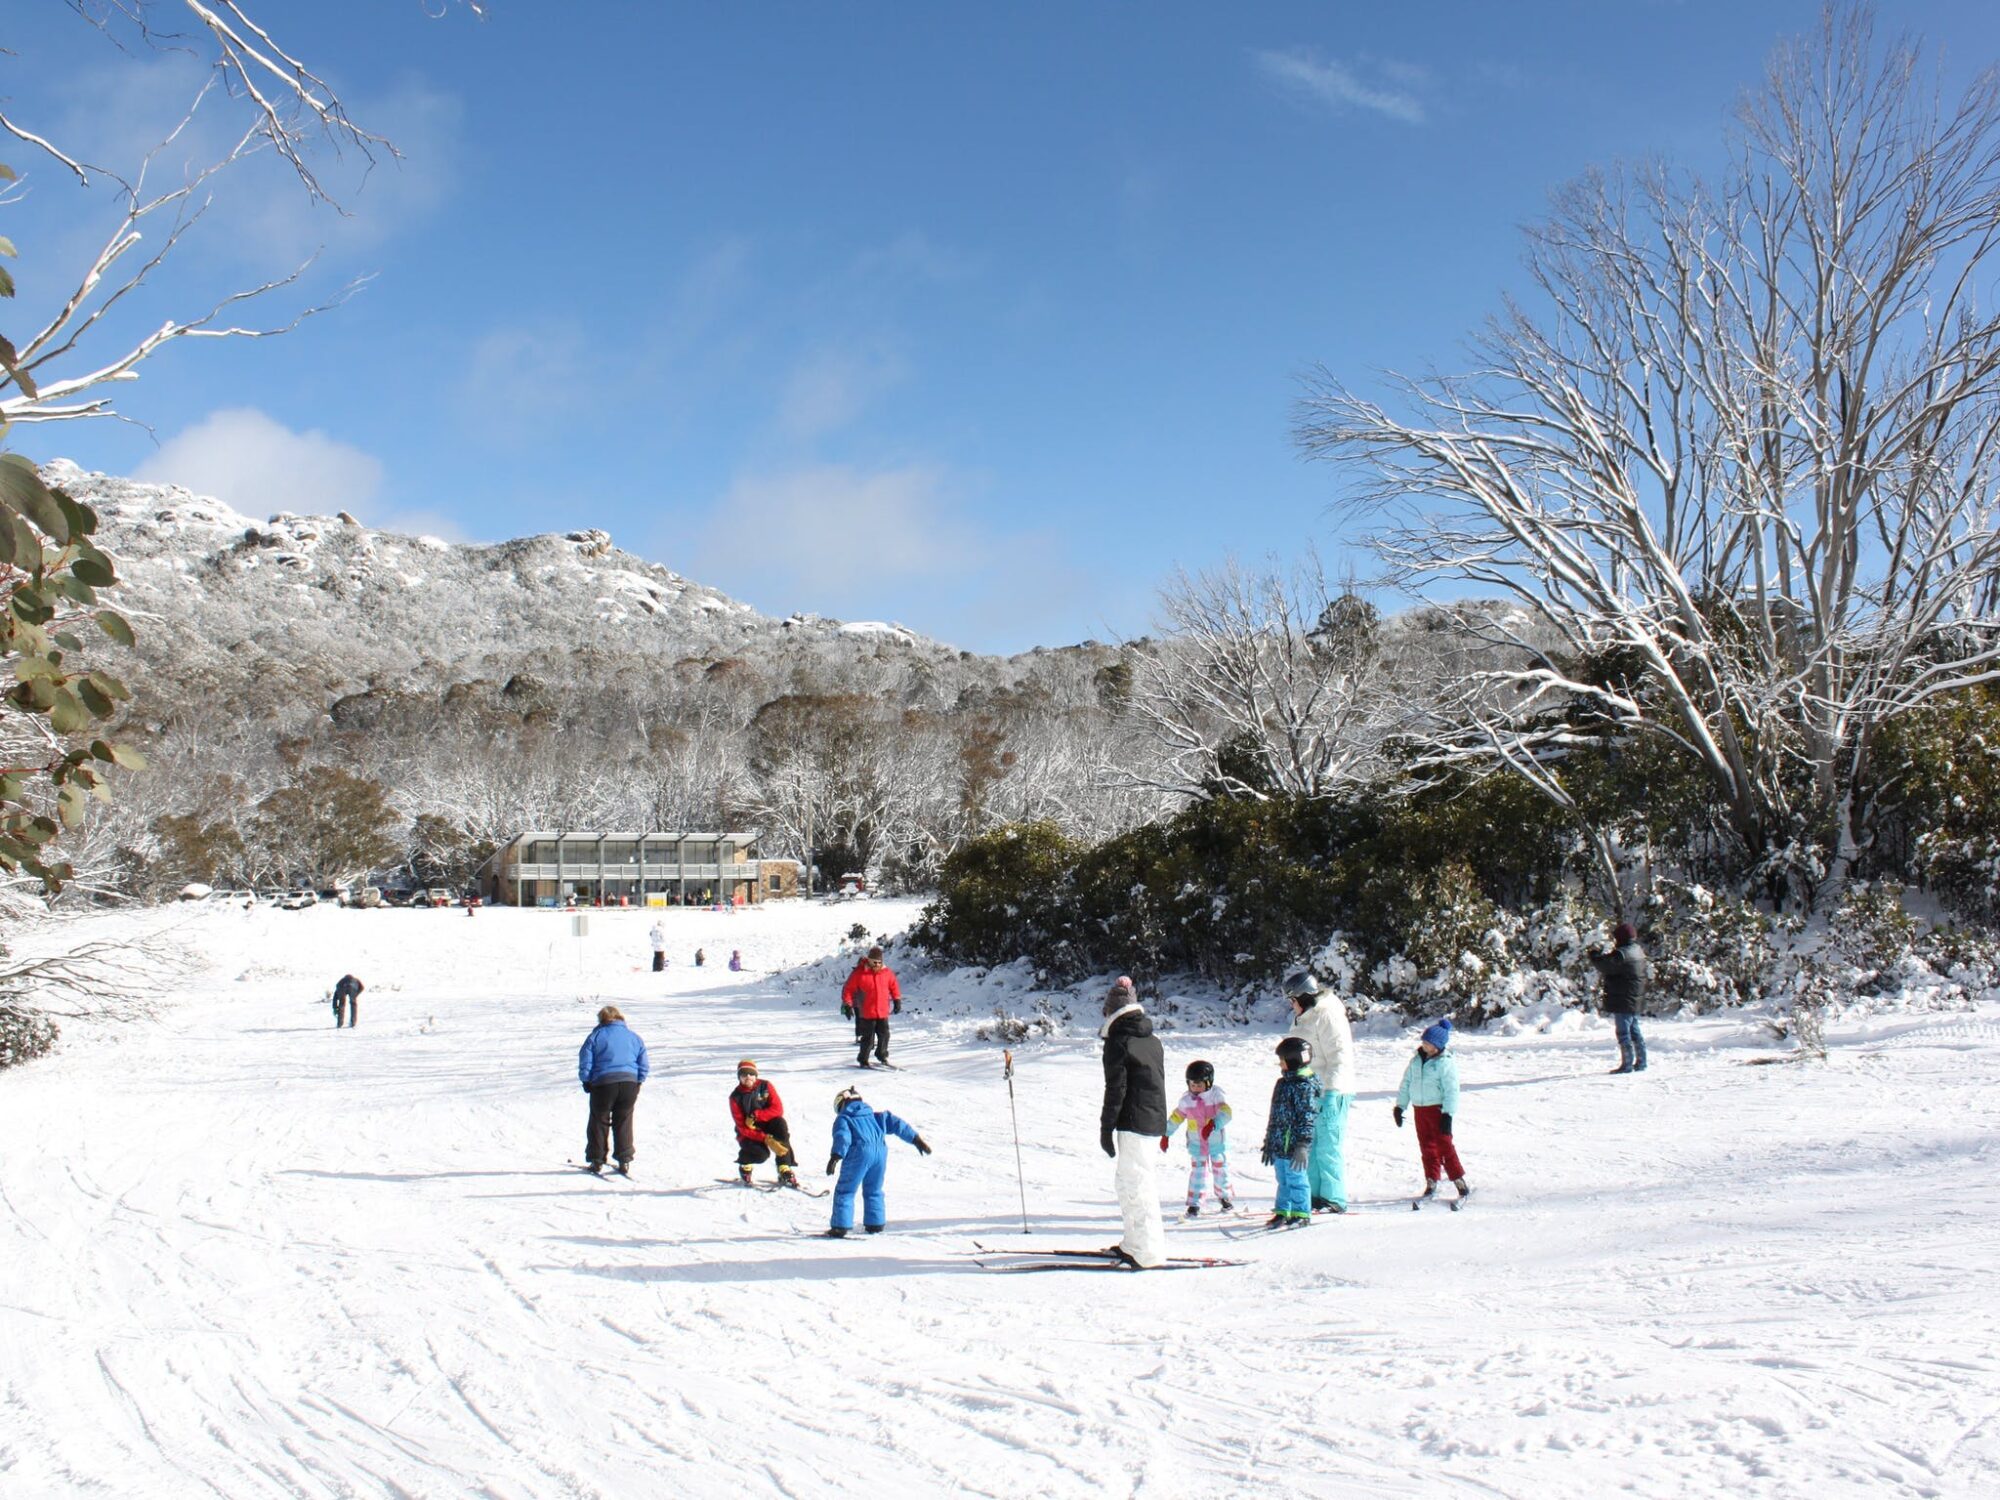 Cross Country Ski lessons at Dingo Dell, Cresta Valley